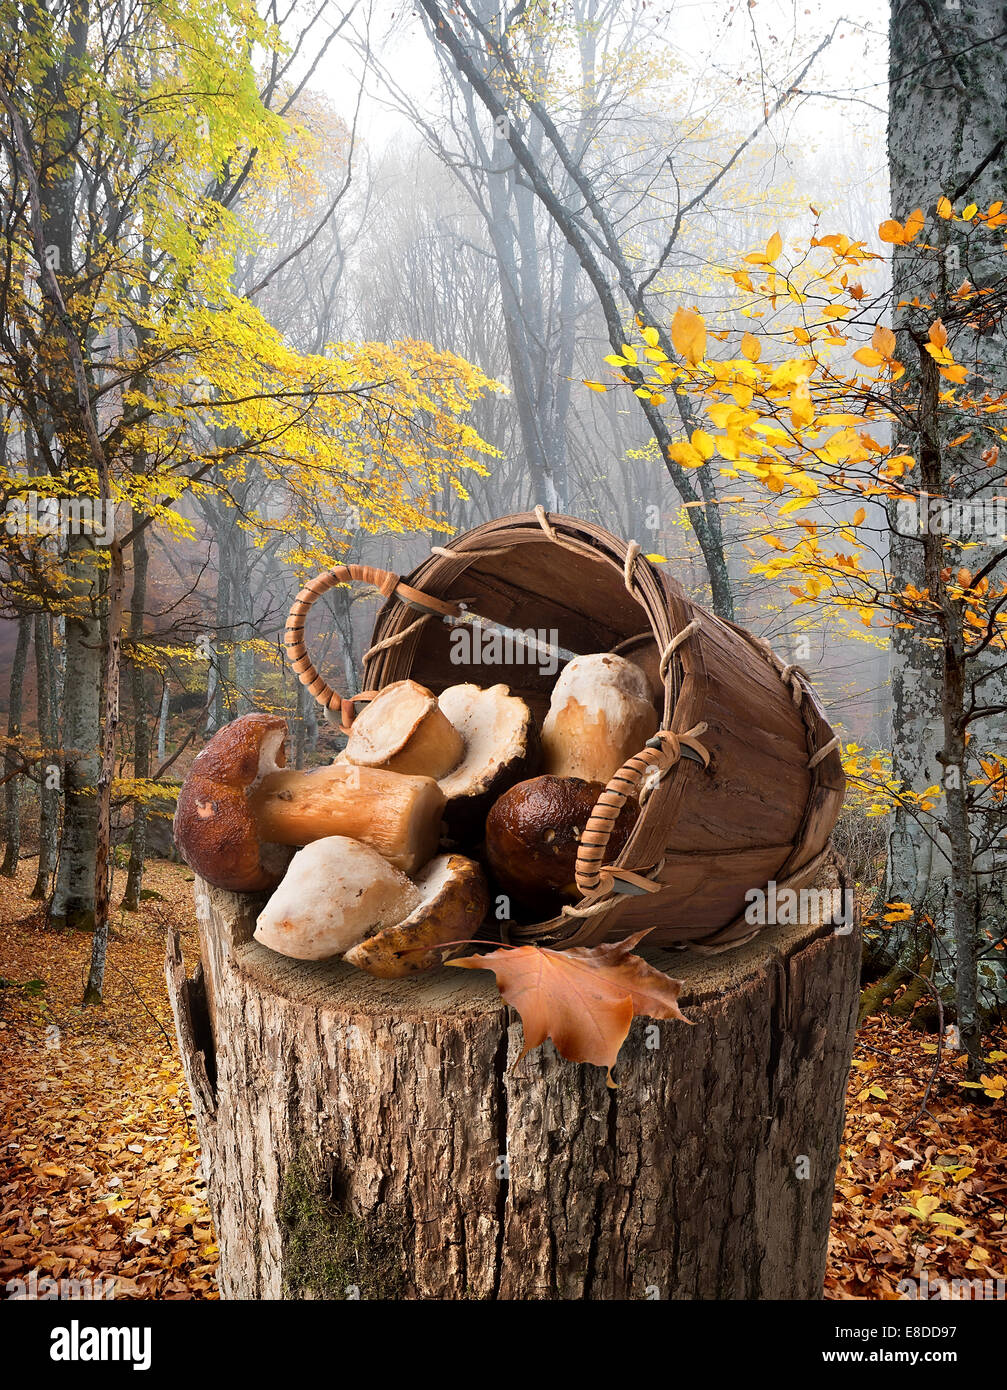 Mushrooms in a basket on stump in autumn forest Stock Photo